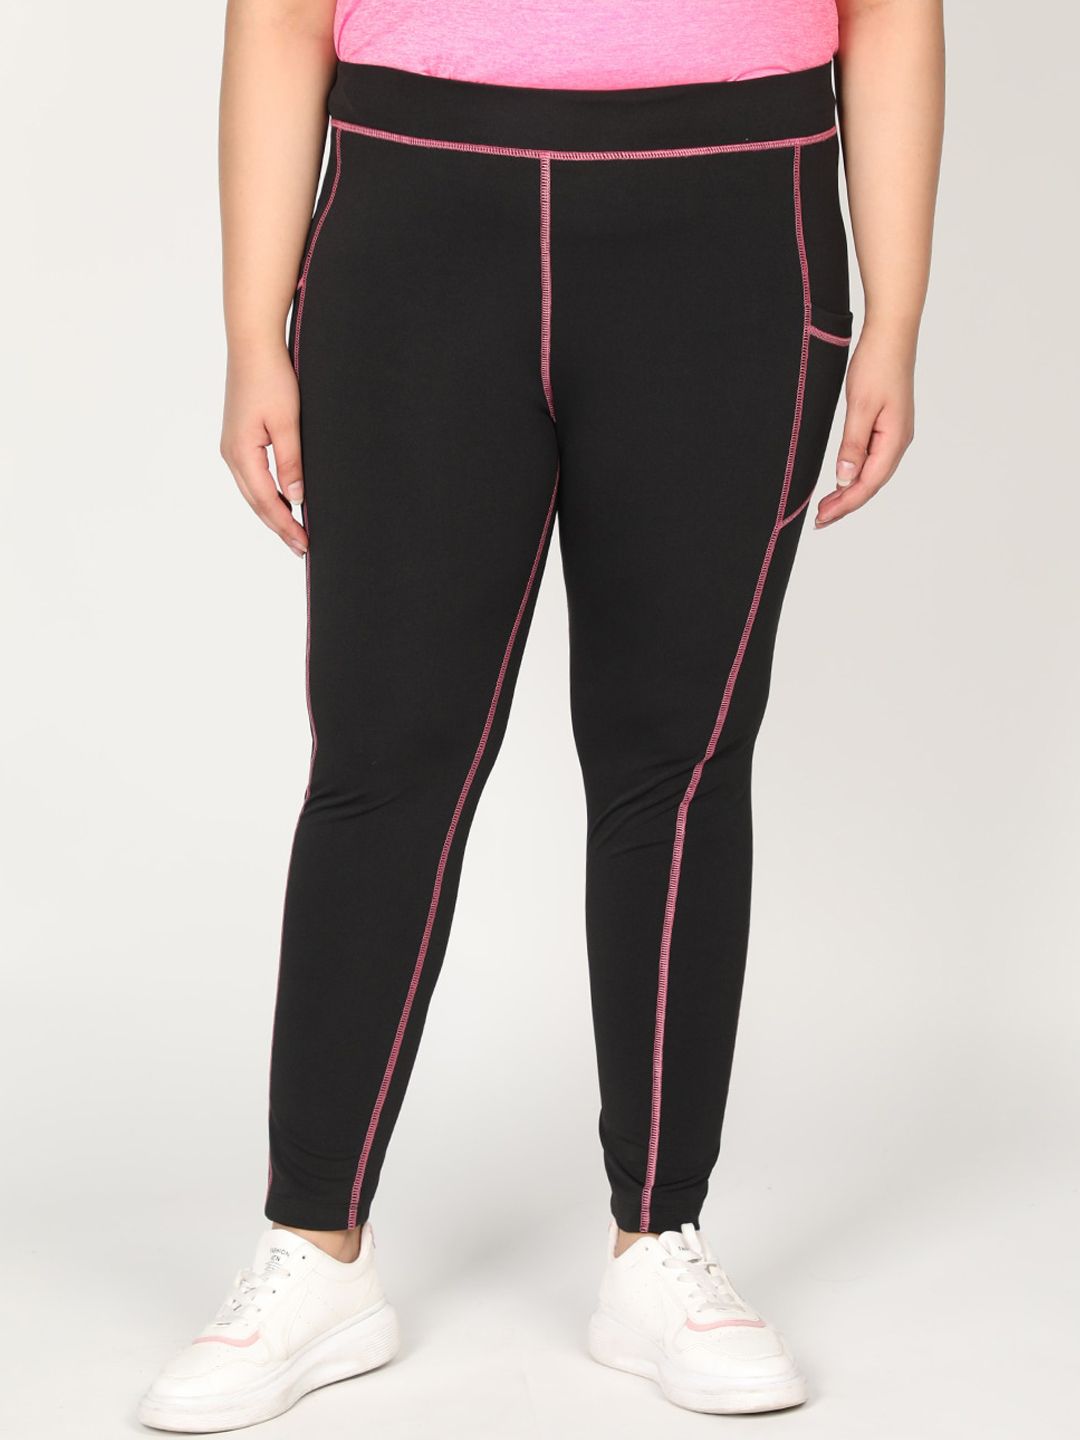 CHKOKKO Plus Women Black Pink Solid Skinny-Fit Tights Price in India